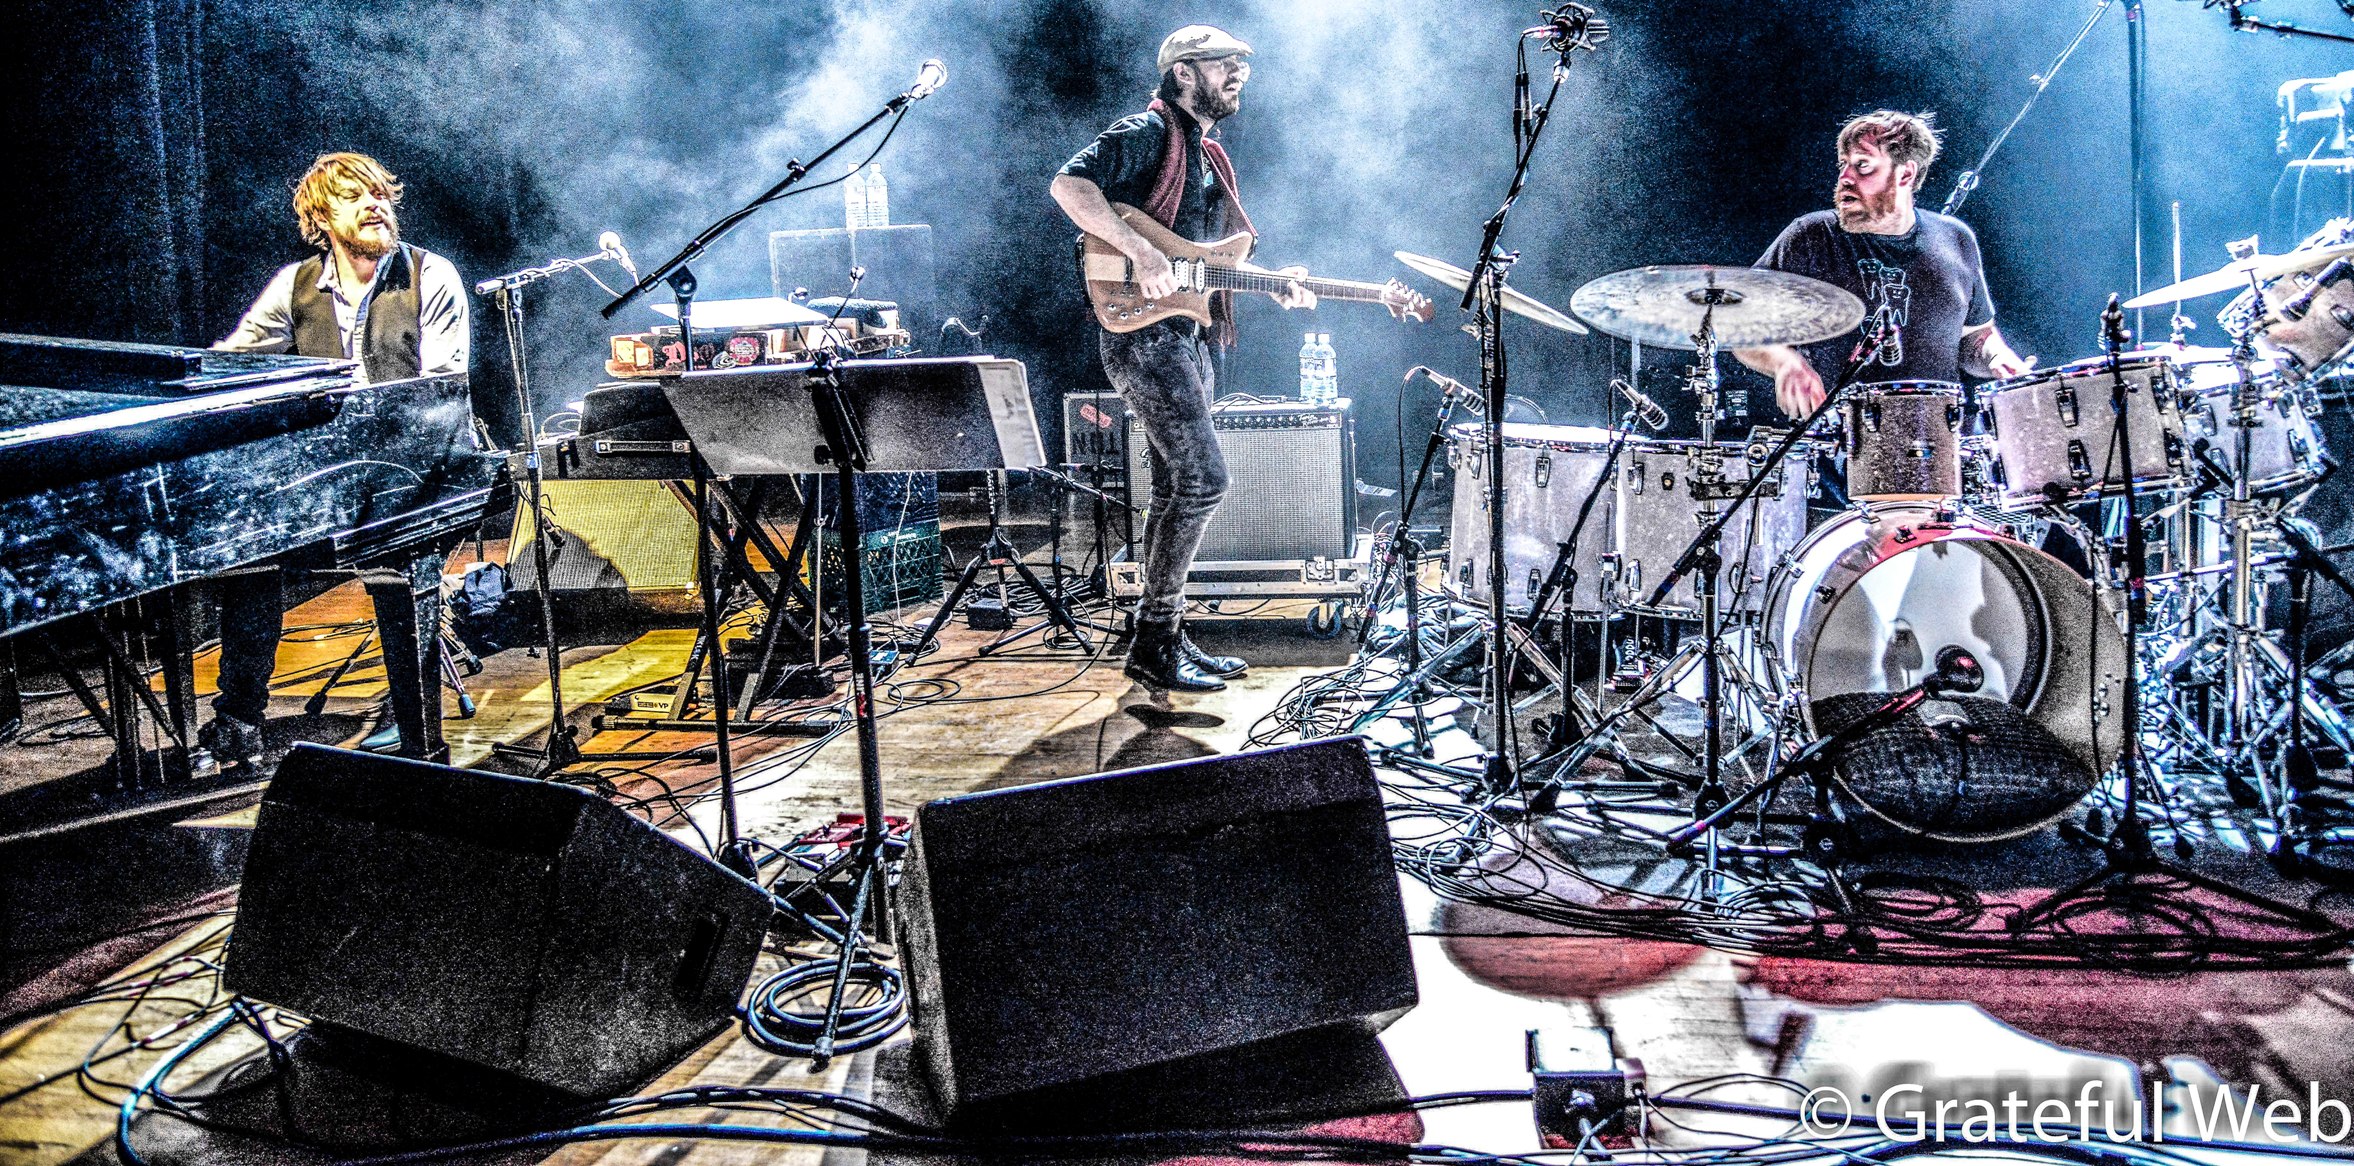 Joe Russo's Almost Dead | 2/16/15 | Review